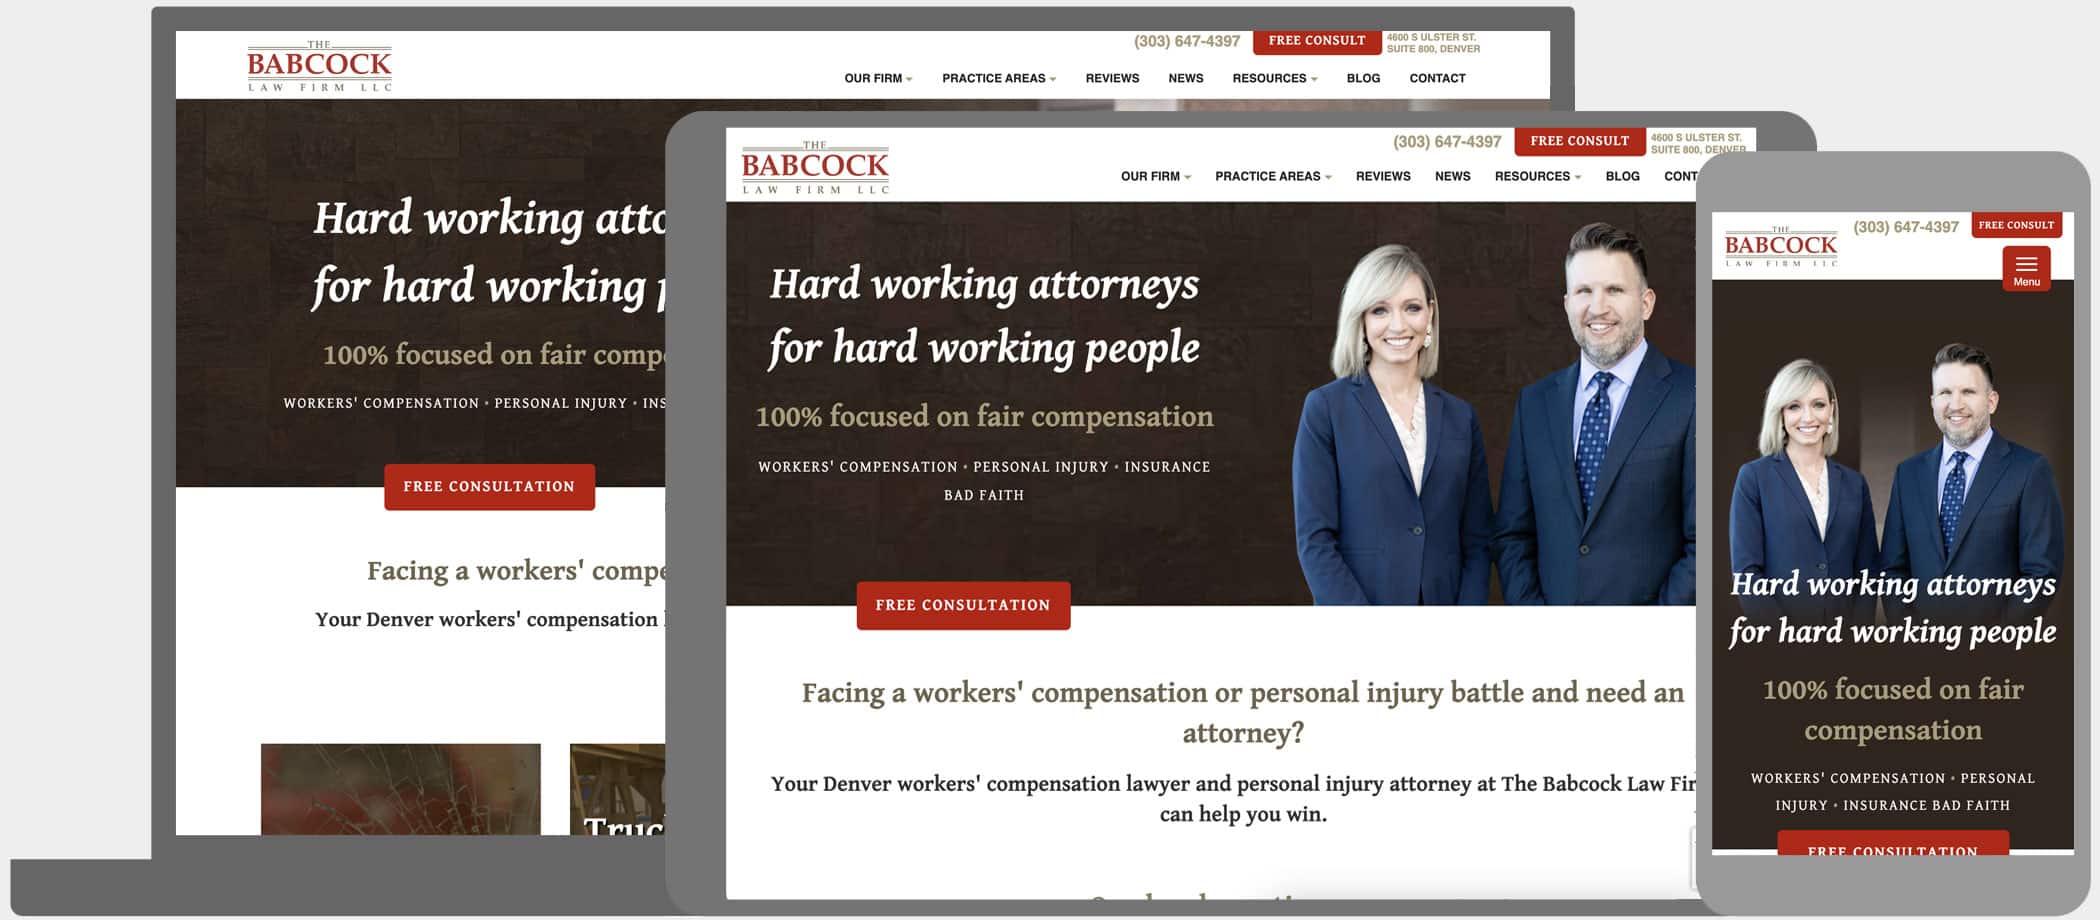 The Babcock Law Firm: User friendly and search engine optimized web site design and content building for Denver workers' compensation and injury attorney, Mack Babcock.